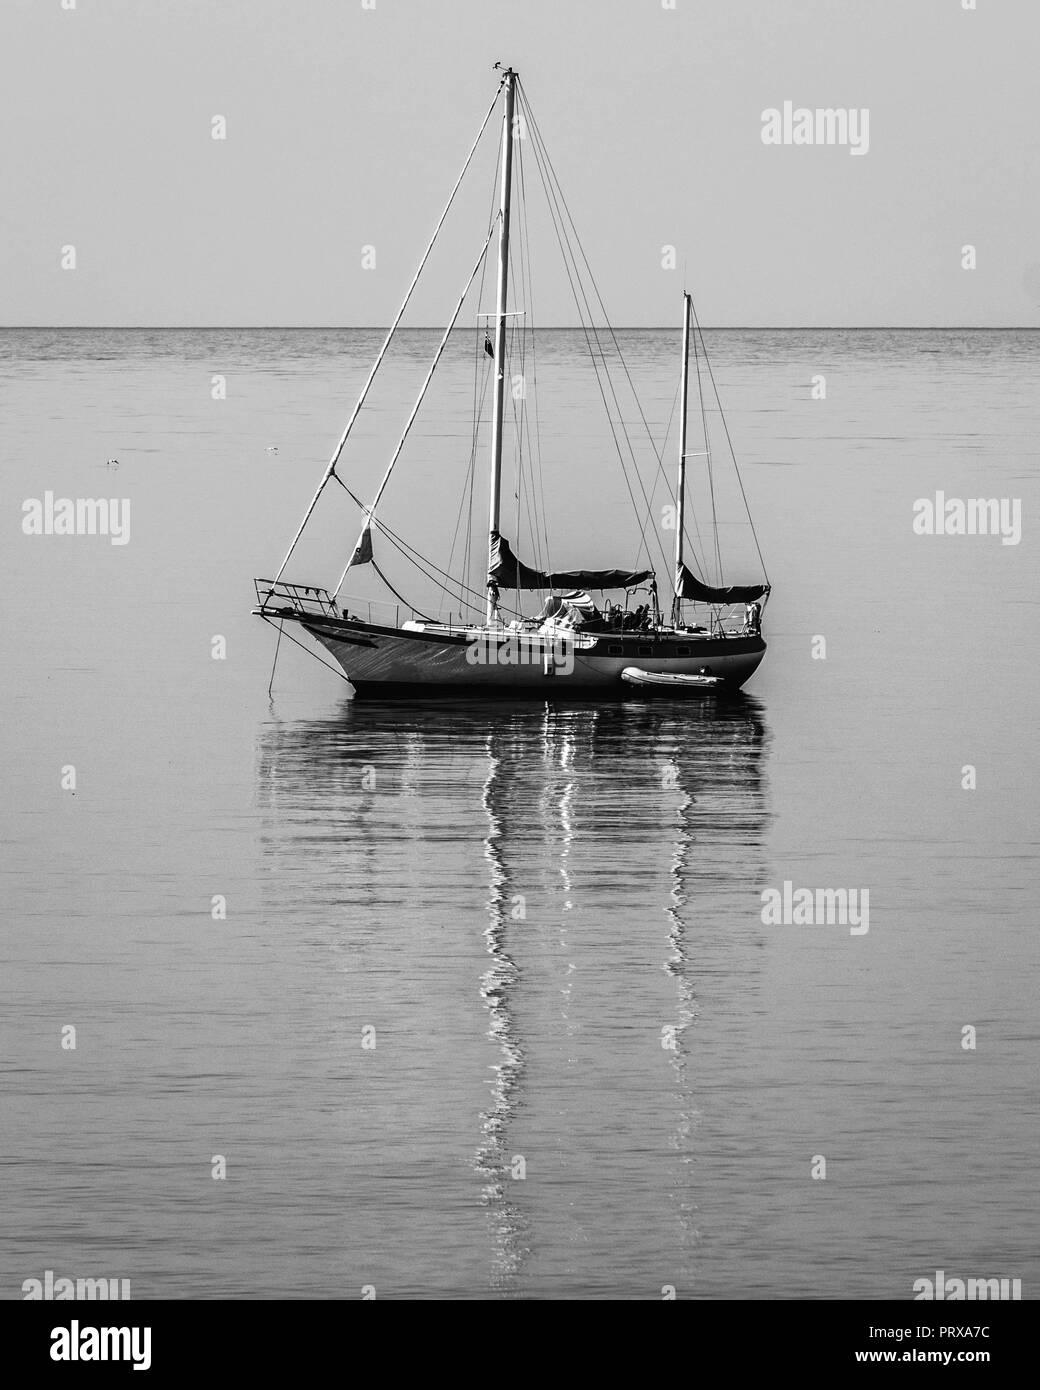 A sailing boat and reflection on the ocean off of Budleigh Salterton, East Devon, South West England, United Kingdom. Stock Photo